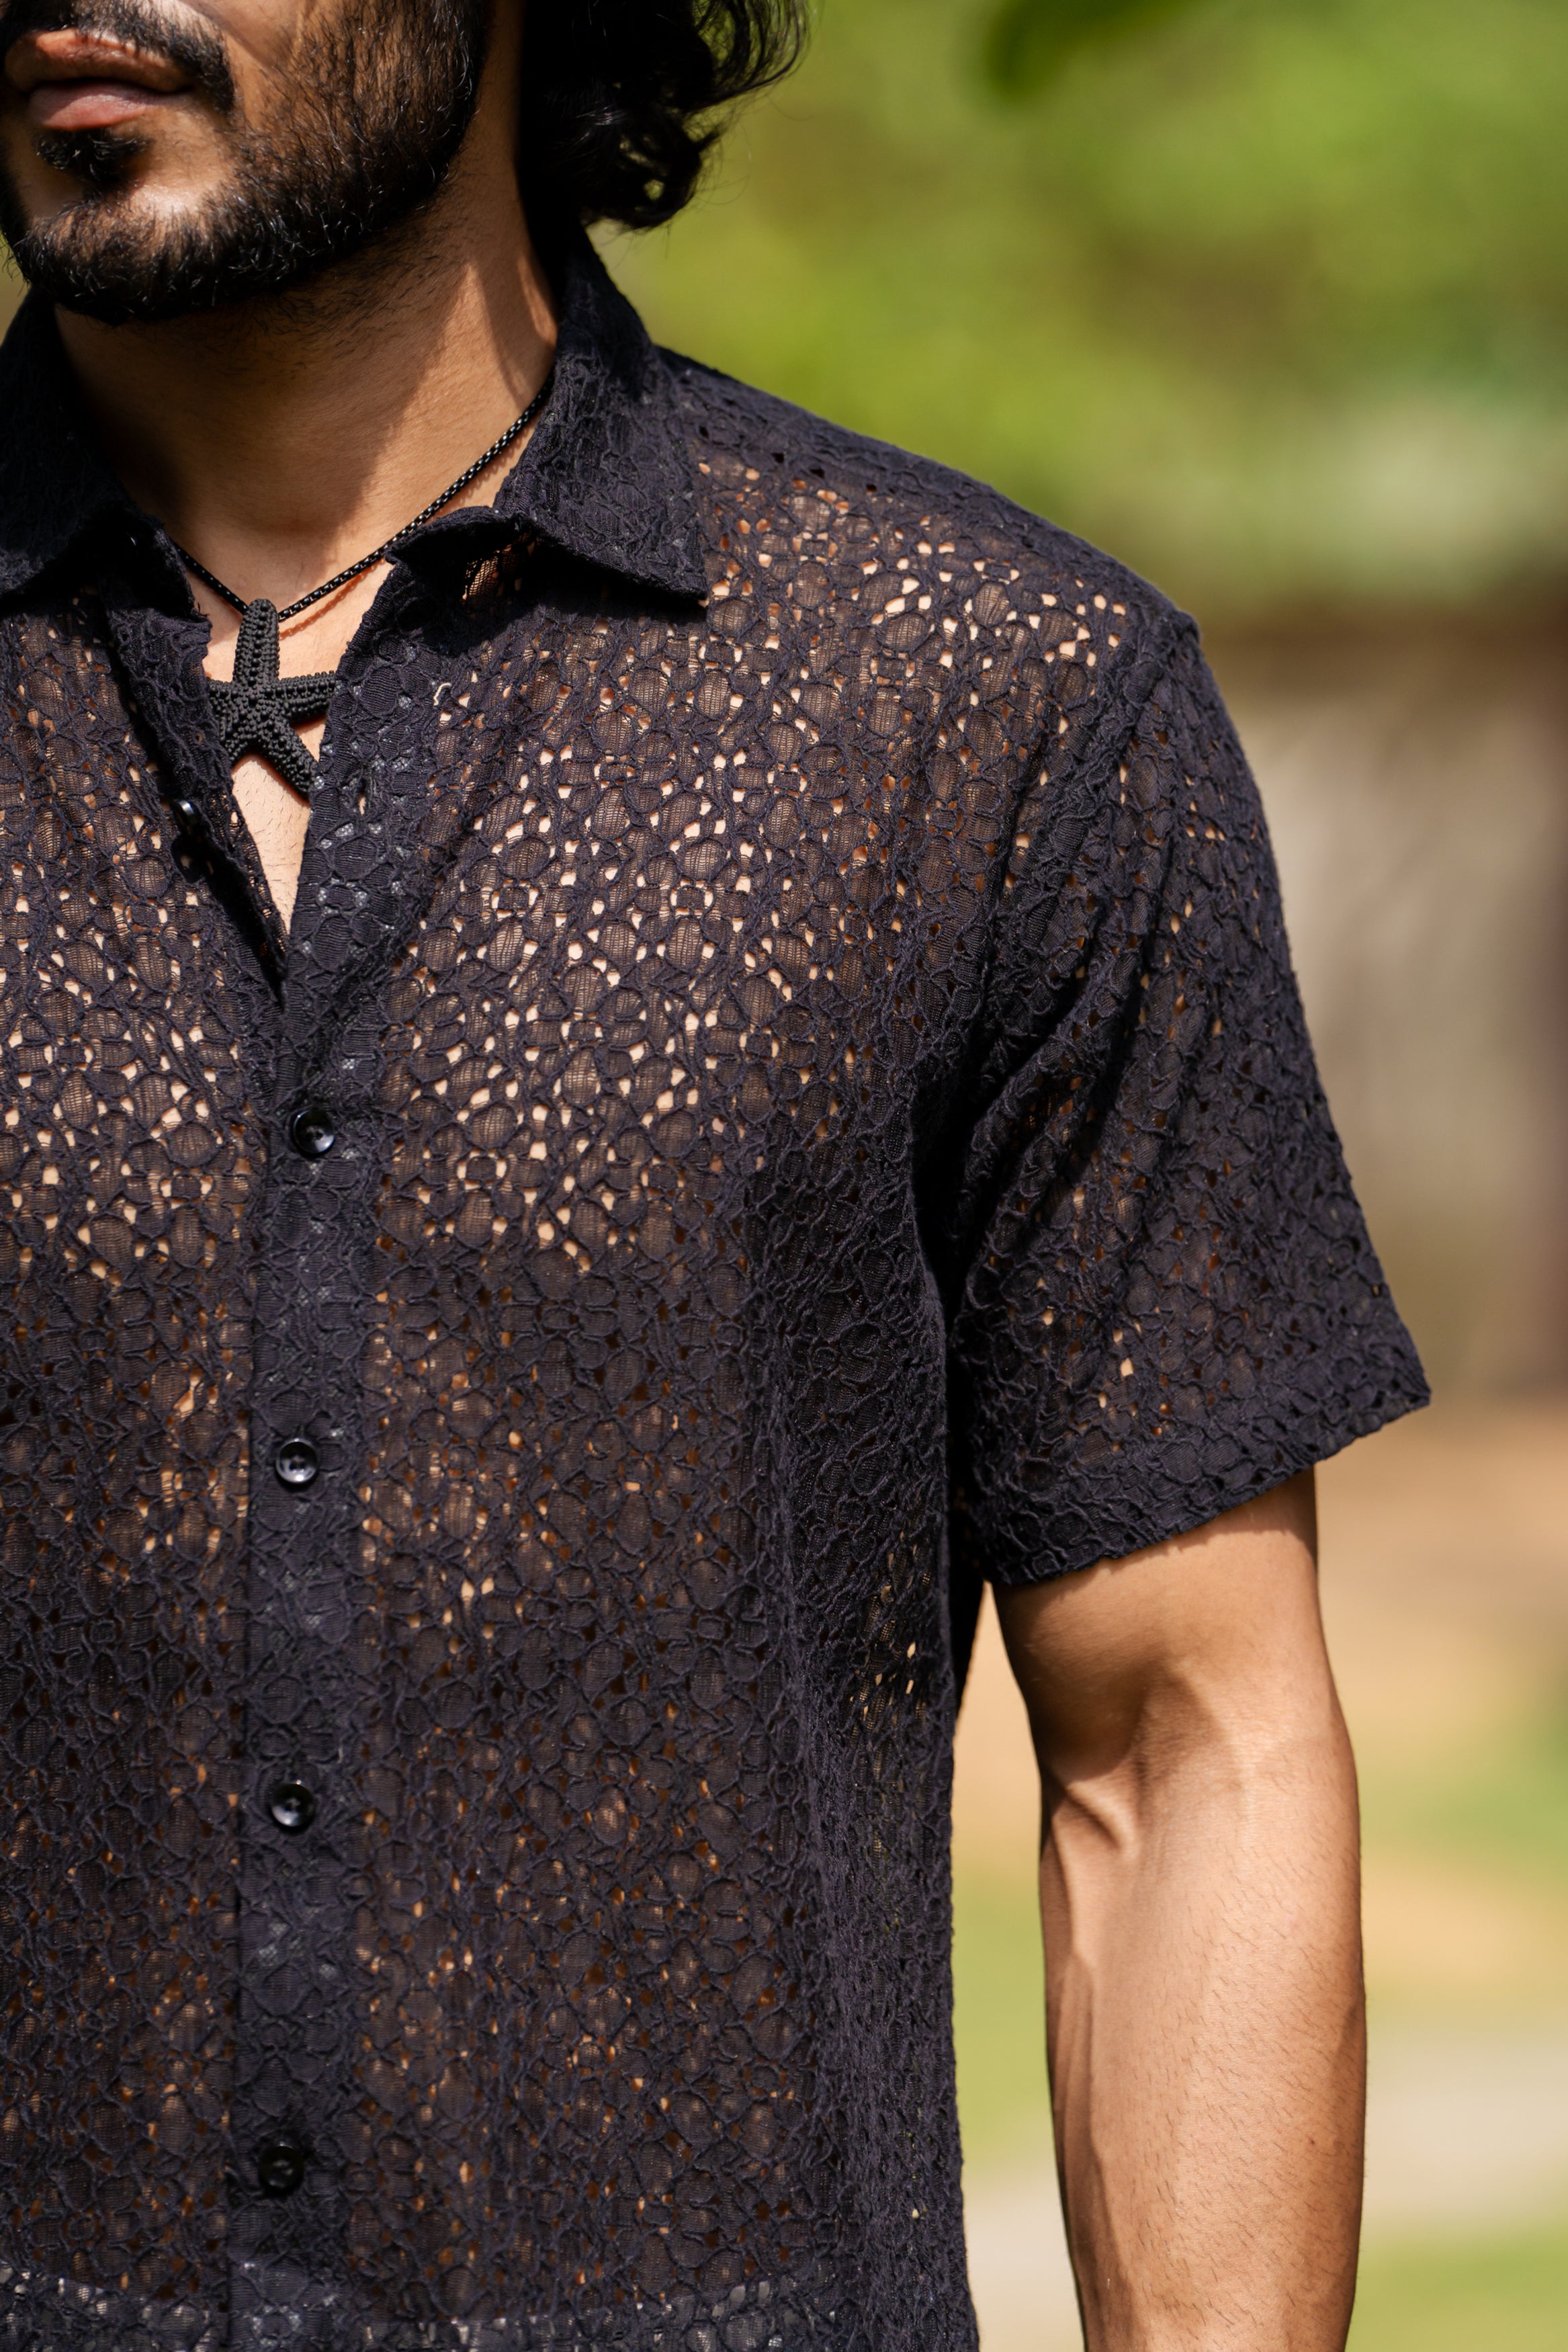 Firangi Yarn Crochet Cotton Jet Black Floral Lace Shirt For Men 2024 - Half Sleeves (Take One Size Bigger Than Your Usual Size)